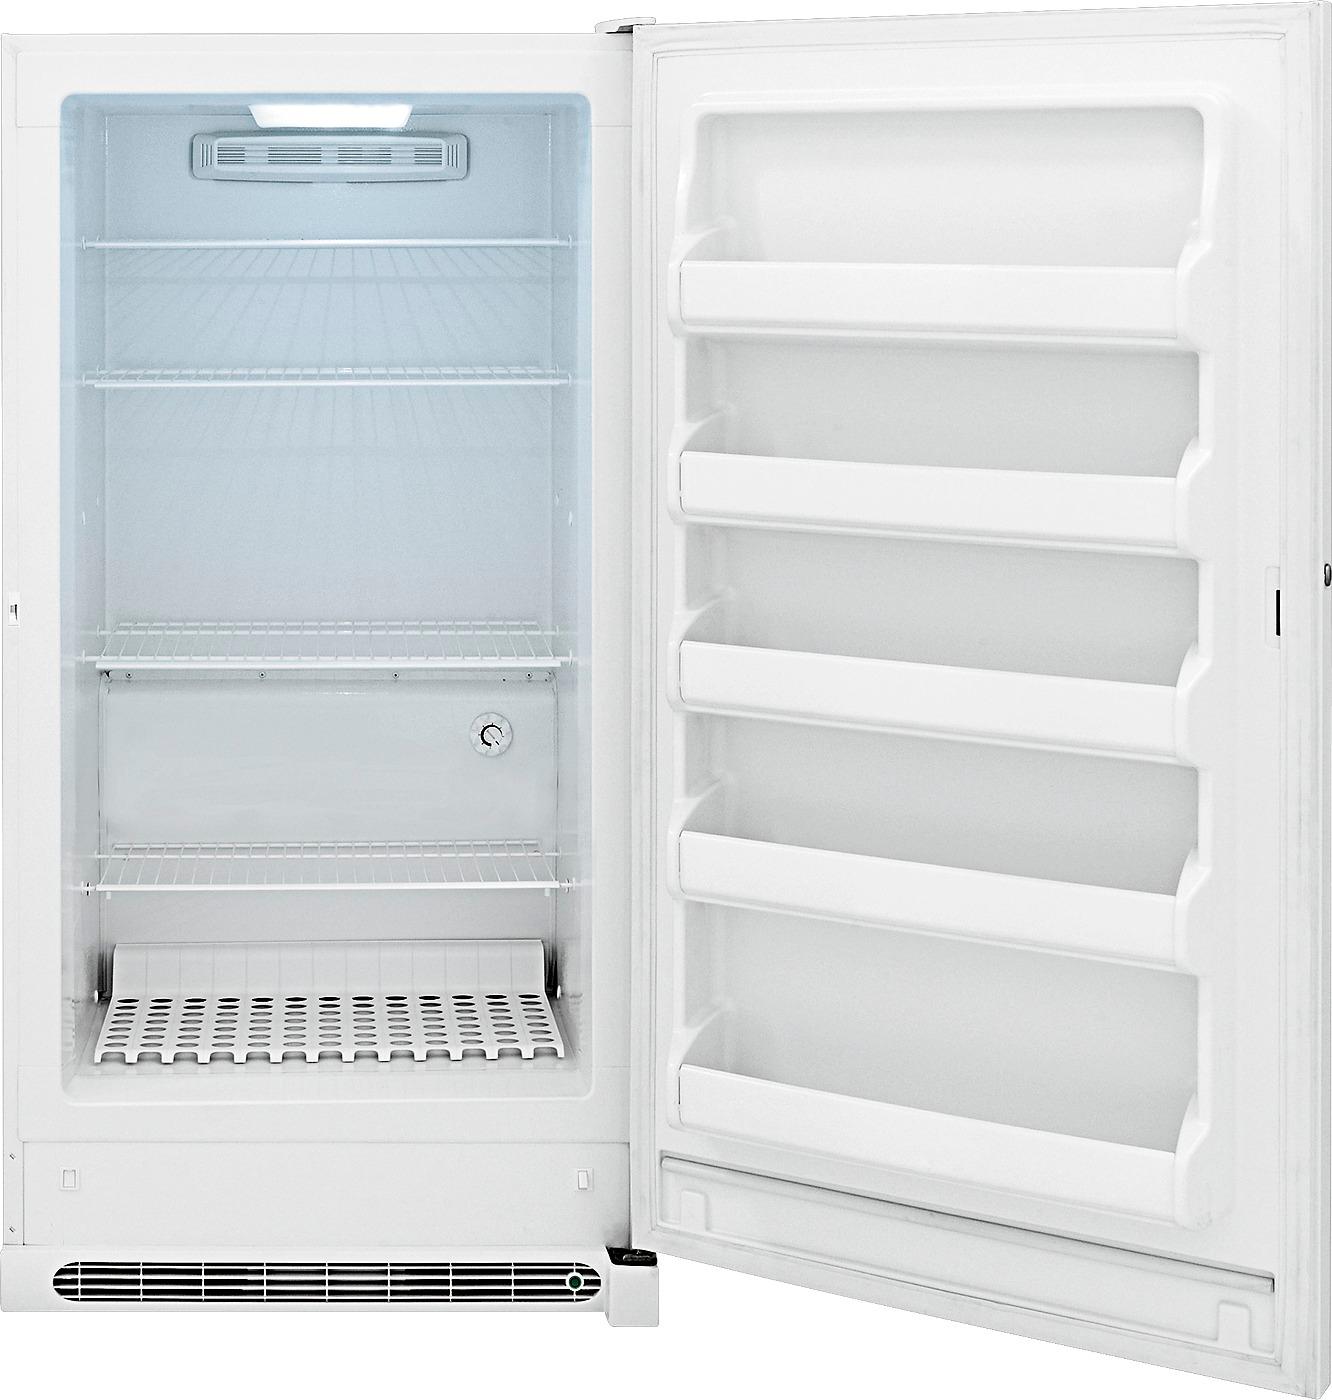 How To Keep Your Frigidaire Upright Freezer Level And Stable